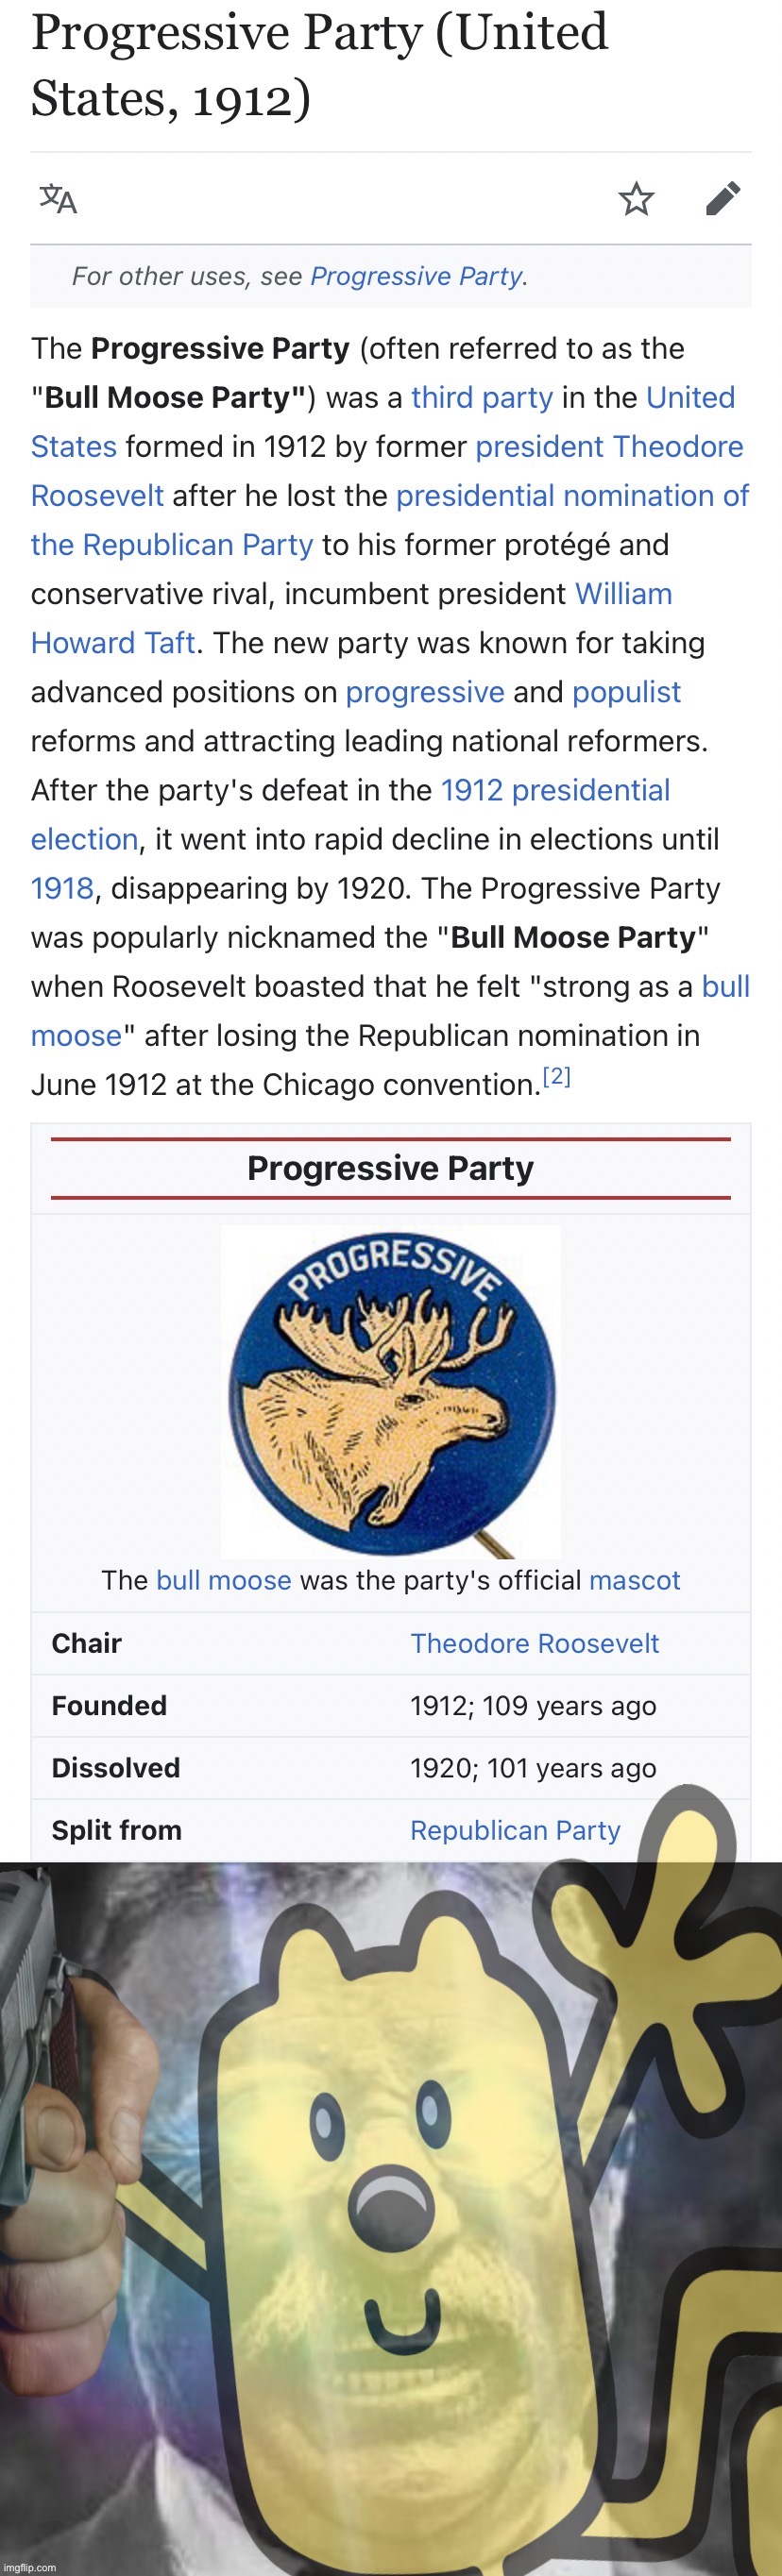 No insinuations here, just an interesting history lesson | image tagged in wubbzy,teddy roosevelt,progressive,party,rup,bull moose | made w/ Imgflip meme maker